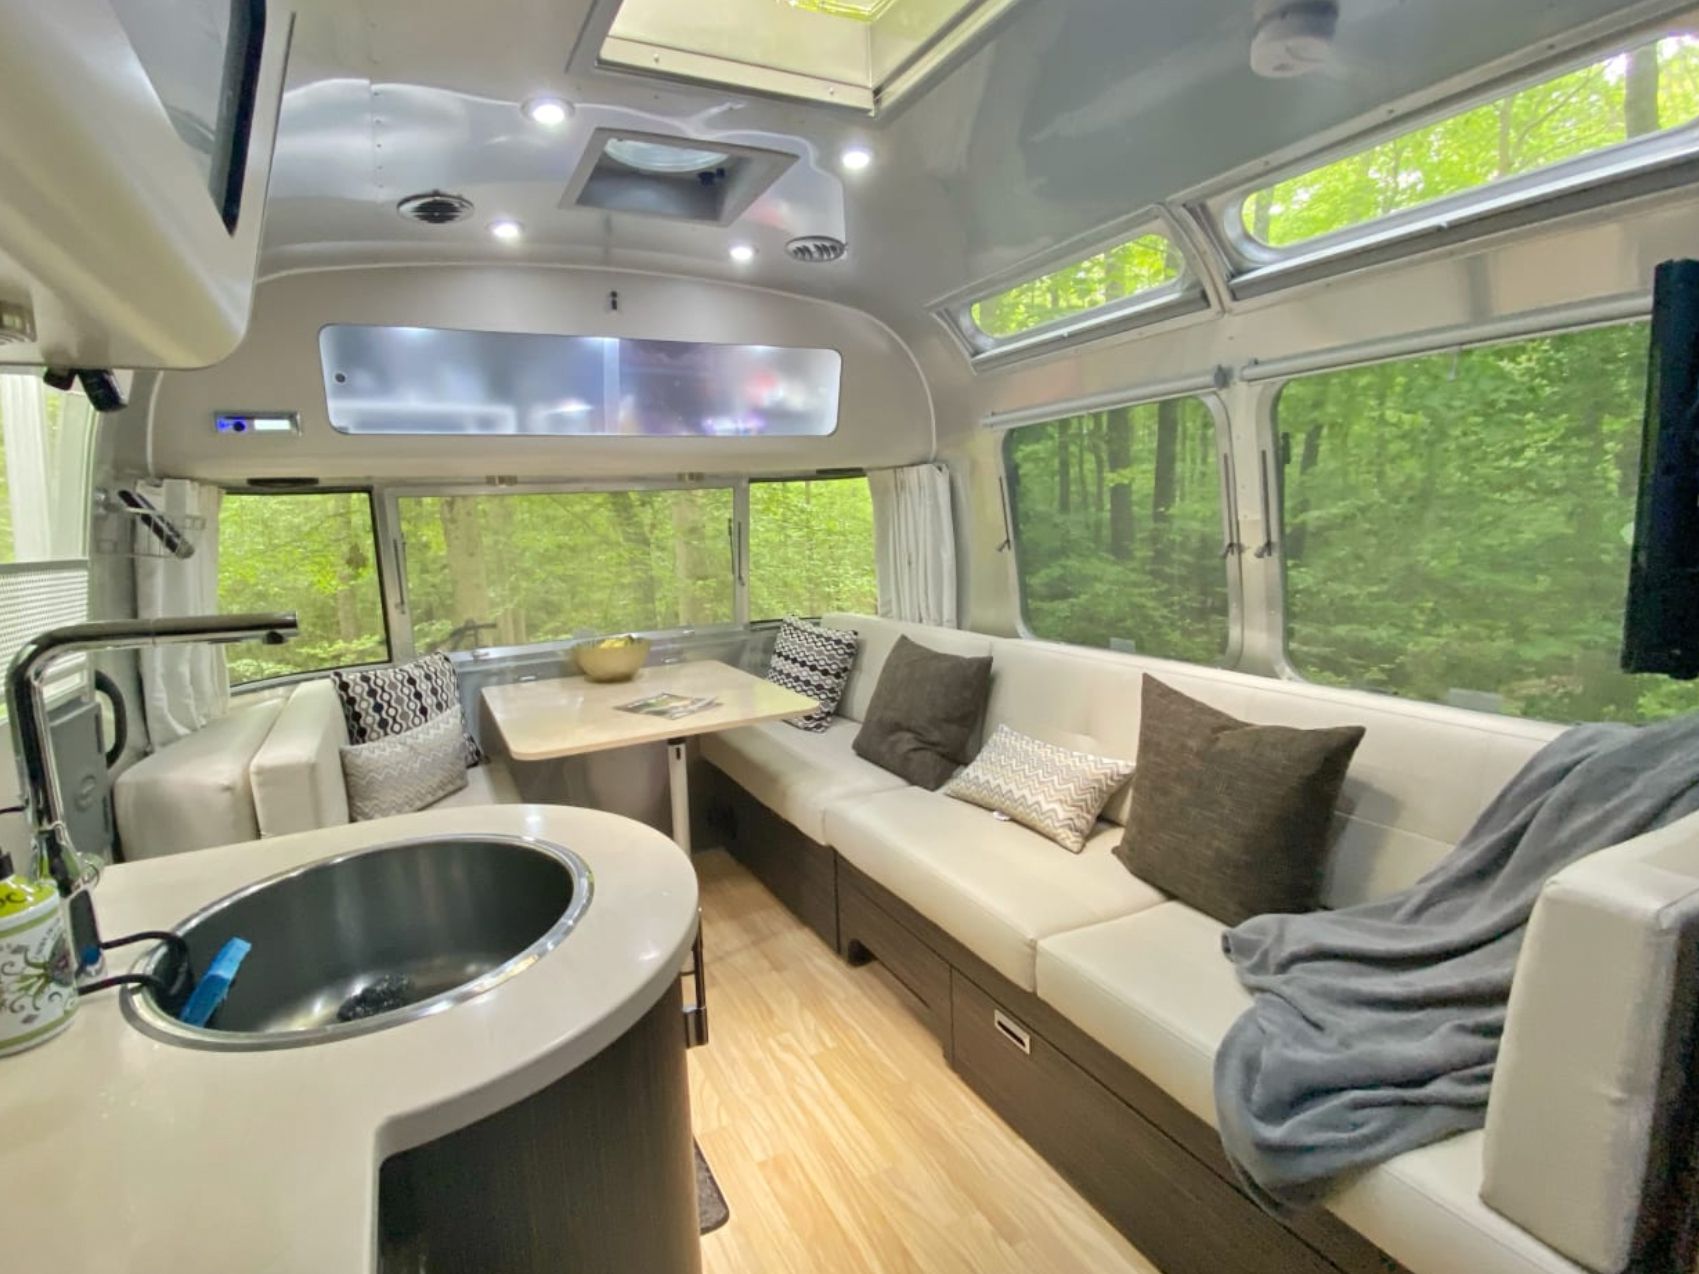 <p>One of the big upsides of owning an RV — no matter the type or style — is that it can bring in a <a href="https://blog.cheapism.com/save-money-when-you-rv/">steady stream of labor-free income</a>. “Most families only use their motorhomes or camper/trailers on average eight weeks per year,” Dix says. “That leaves approximately 10 months each year of your vehicle sitting. I recommend renting out your RV. Renting your motorhome or camper/trailer will be a source of income for your next vacation.” Sites such as <a href="https://www.anrdoezrs.net/links/100000204/type/dlg/sid/28081/https://rvshare.com/list-your-rv">RVShare</a> and its competitors allow owners to rent their campers and RVs directly to vacationers who don’t have one of their own.</p><div class="rich-text"><p>This article was originally published on <a href="https://blog.cheapism.com/what-kind-of-rv-can-i-afford/">Cheapism</a></p></div>